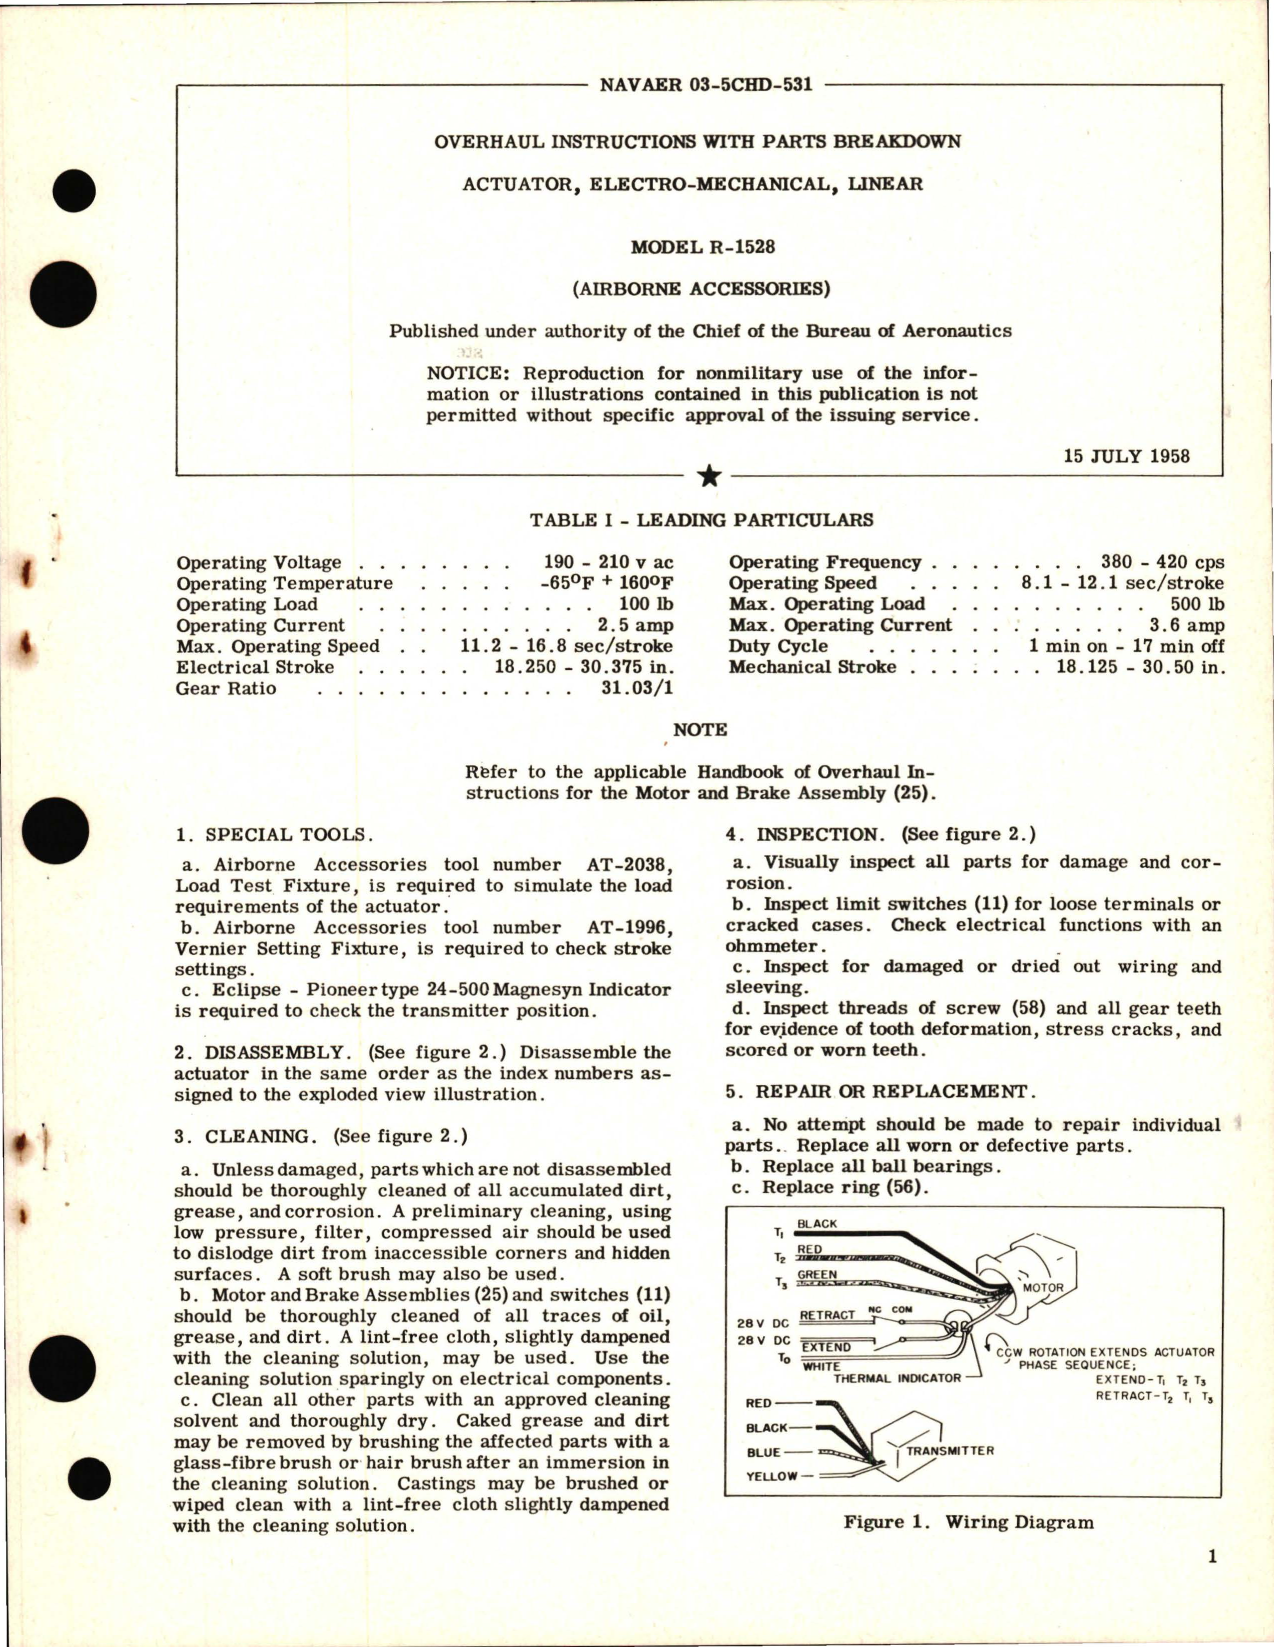 Sample page 1 from AirCorps Library document: Overhaul Instructions with Parts Breakdown for Actuator, Electro-Mechanical, Linear Model R-1528